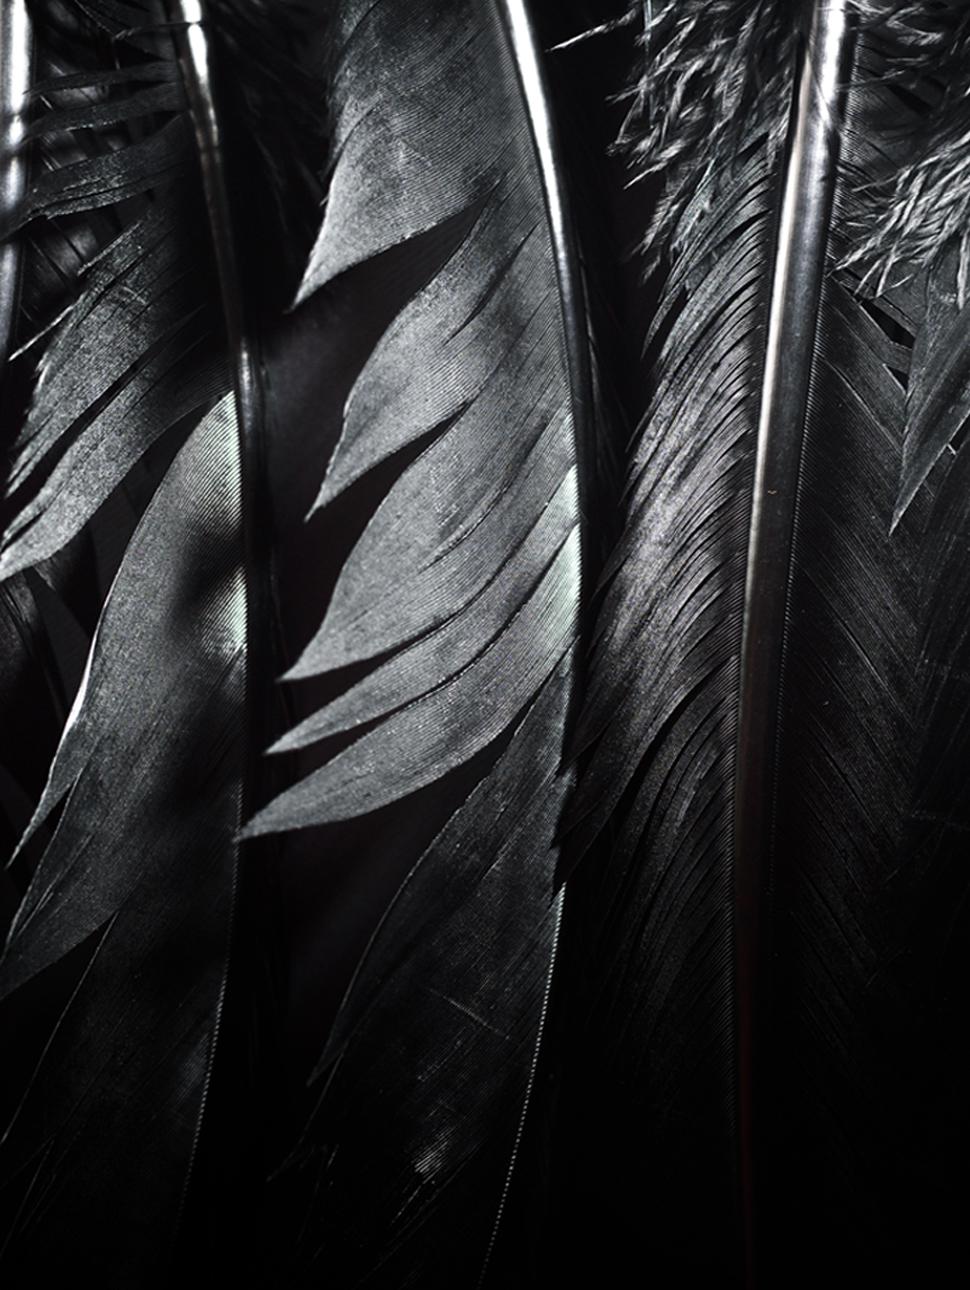 An abstract photo of black raven feathers